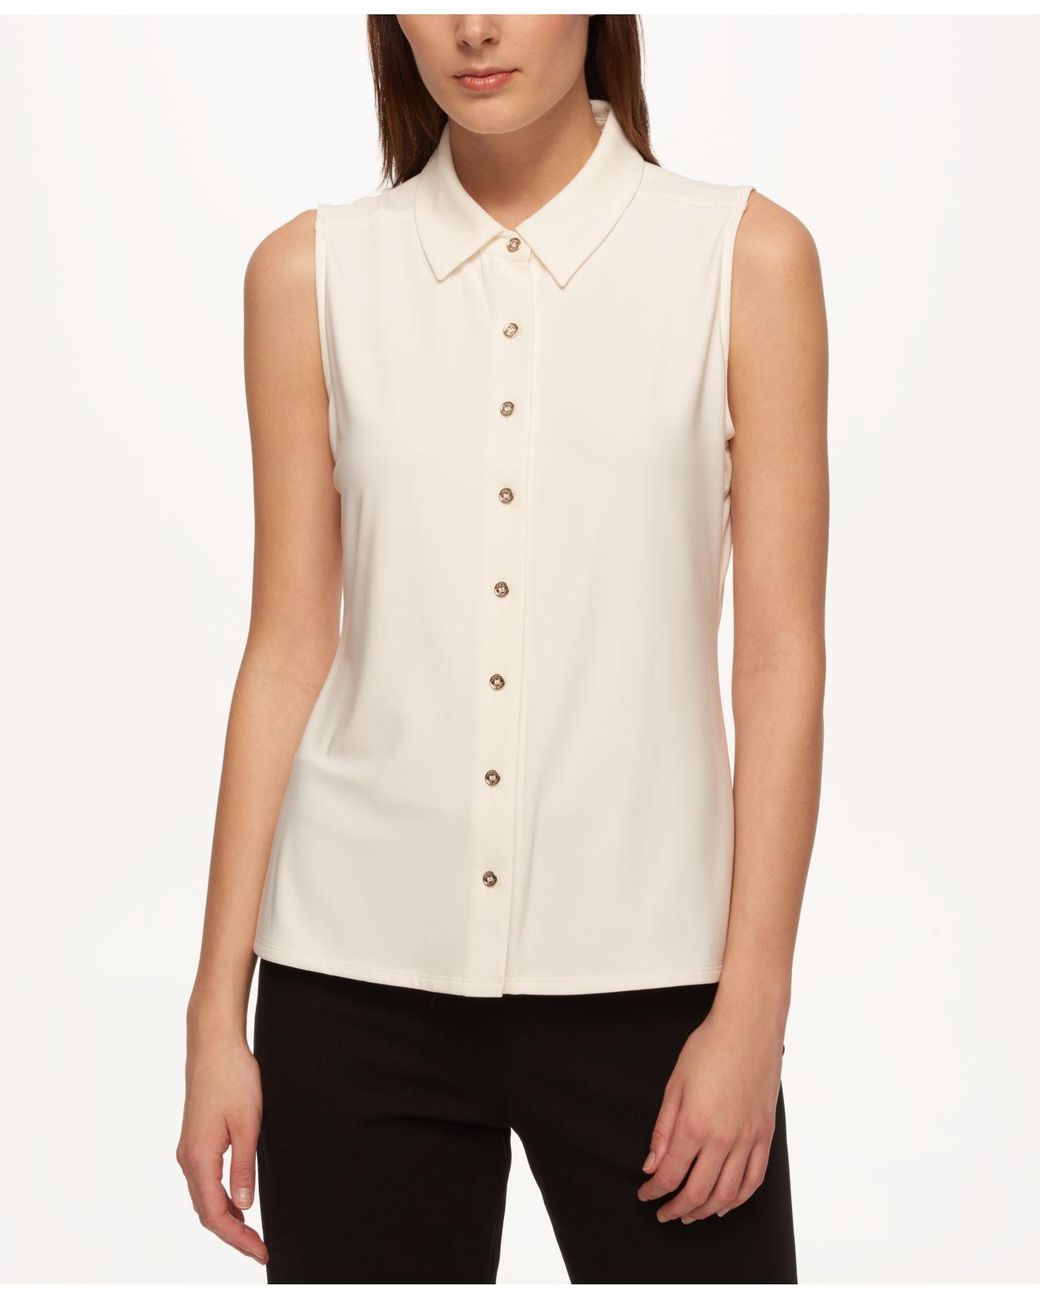 Tommy Hilfiger Synthetic Sleeveless Button-up Shirt in Ivory (White) - Lyst